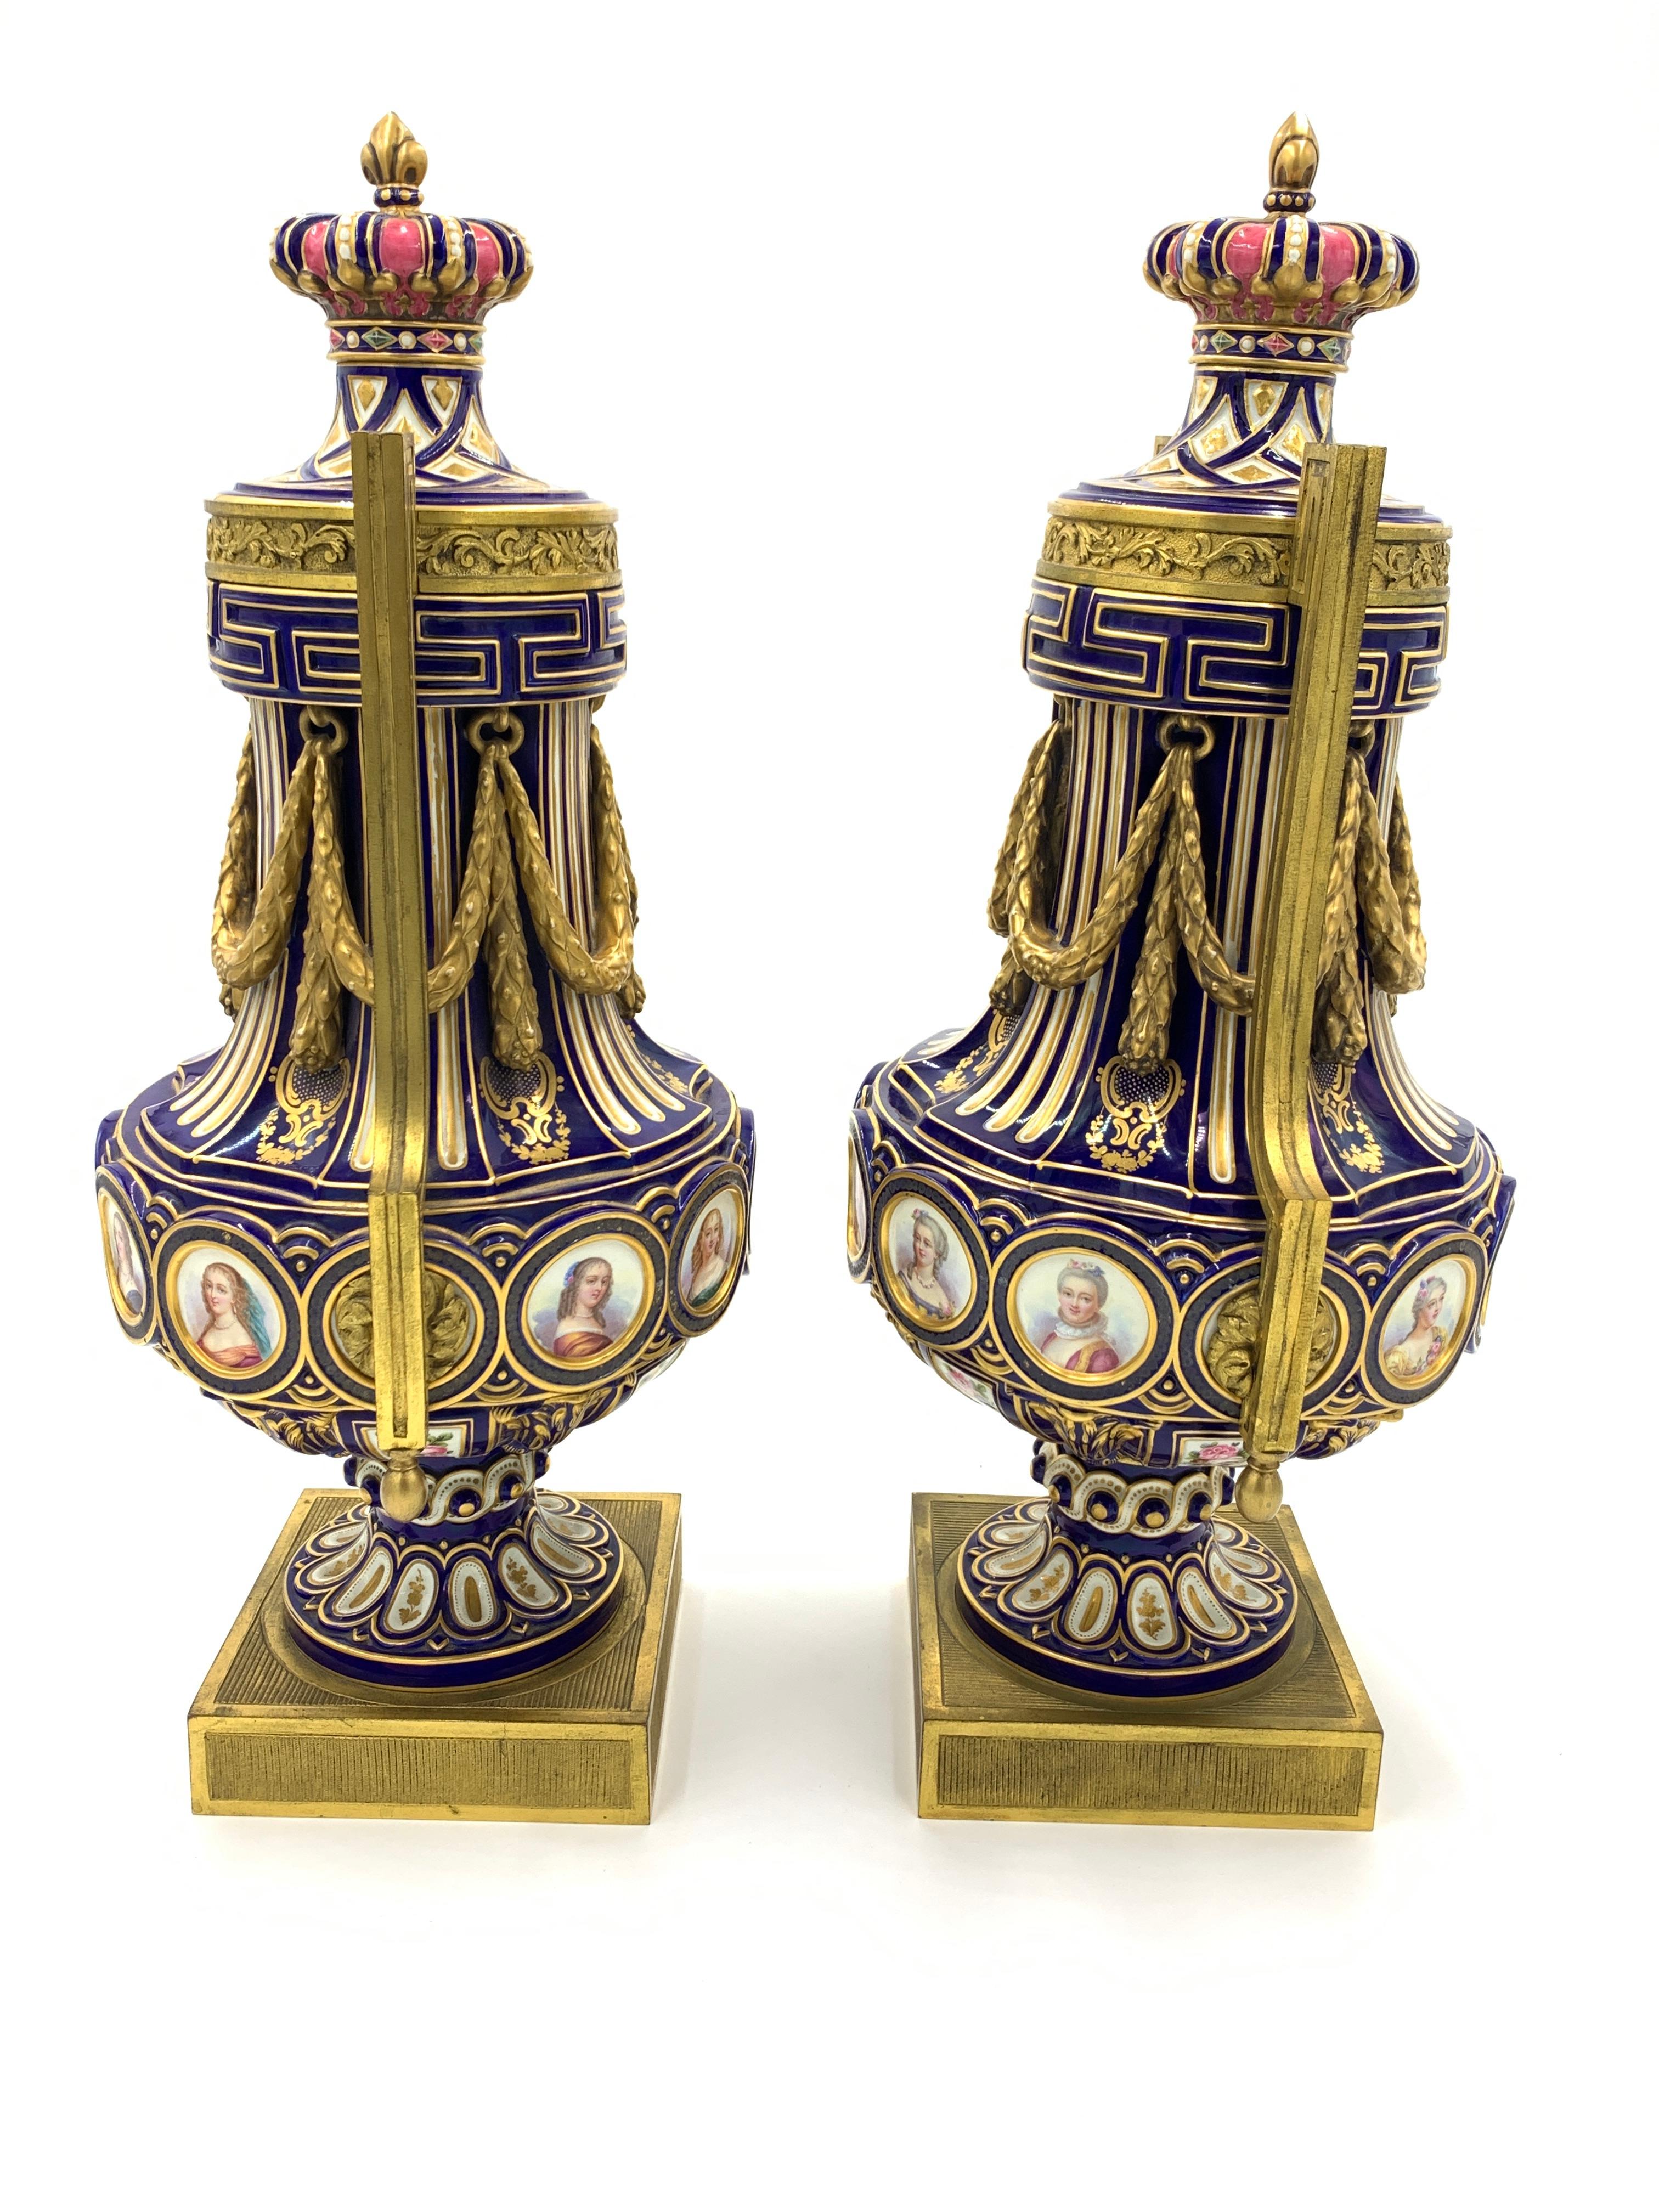 Exquisite pair of sevres style vases, portraits all around the ovoid body on each vase.
 